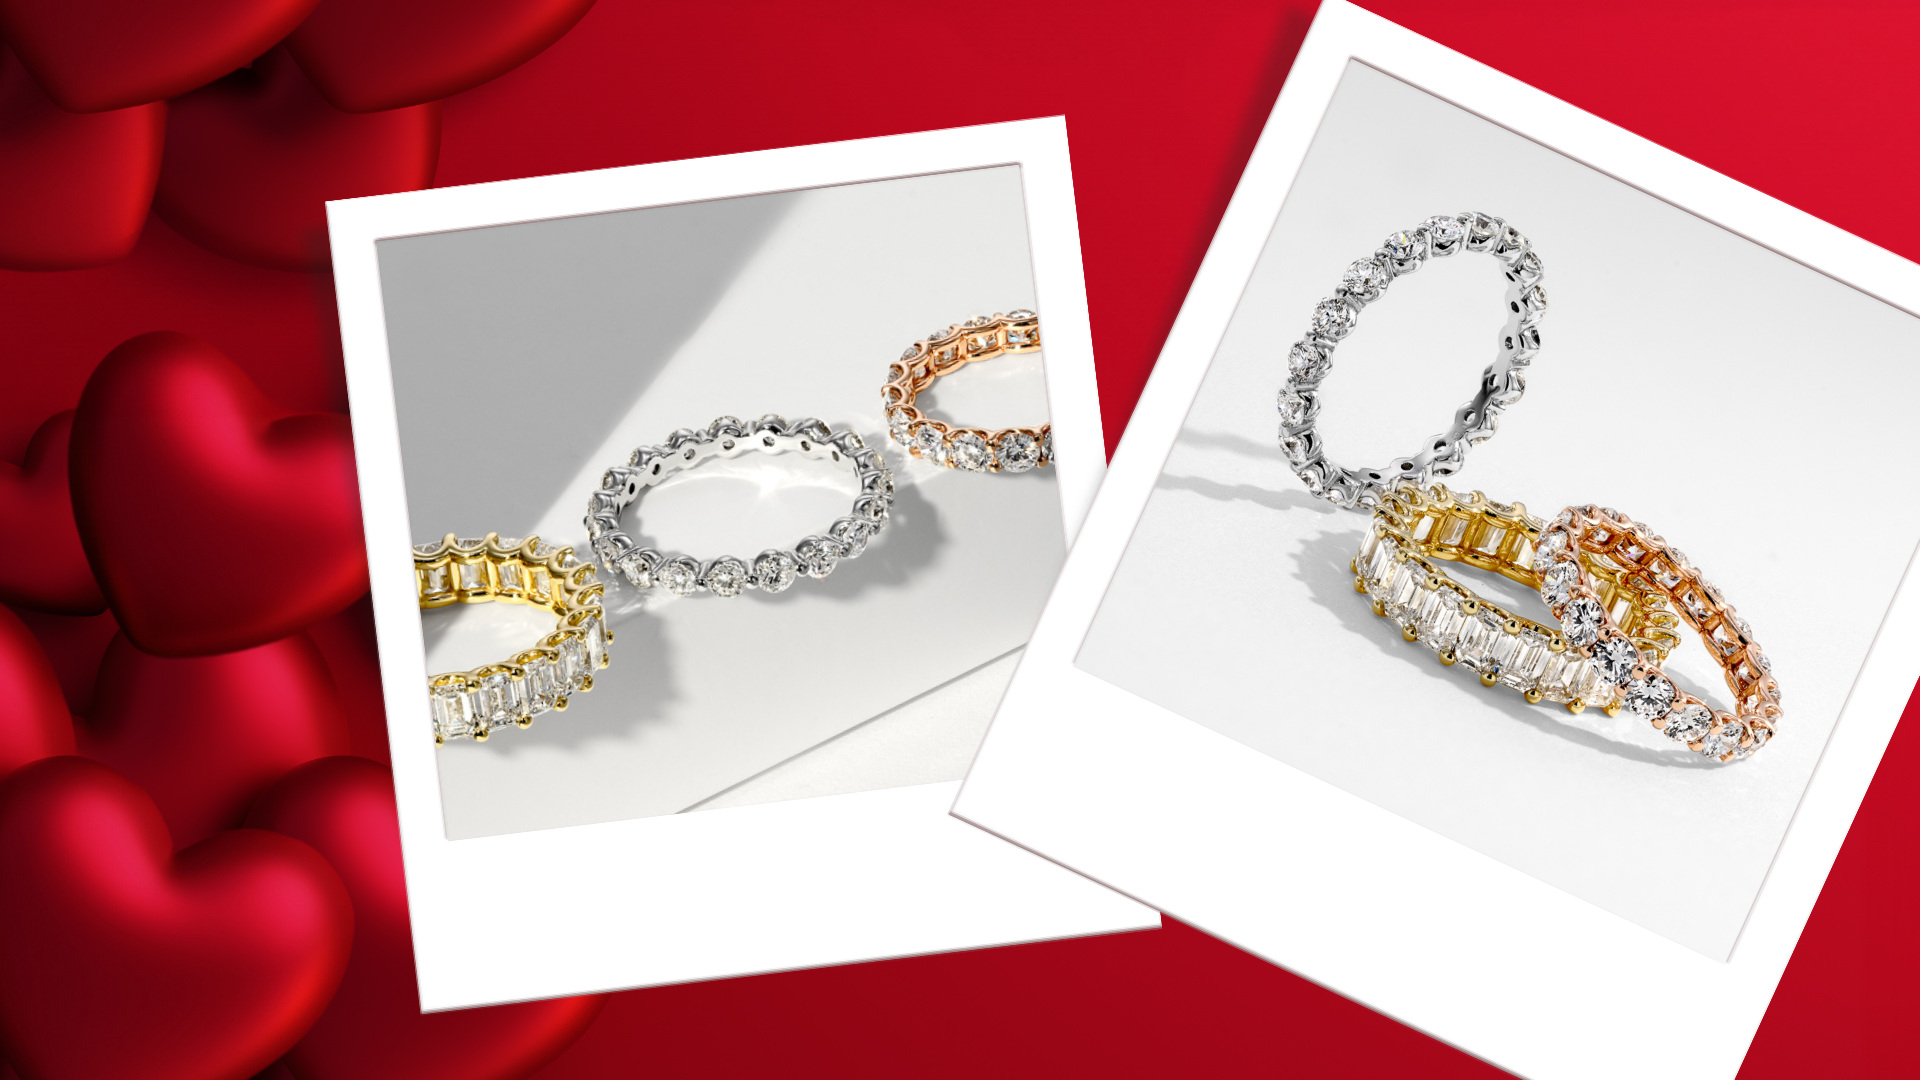 The Circle of Love: Why Eternity Rings Make the Perfect Valentine's Gifts